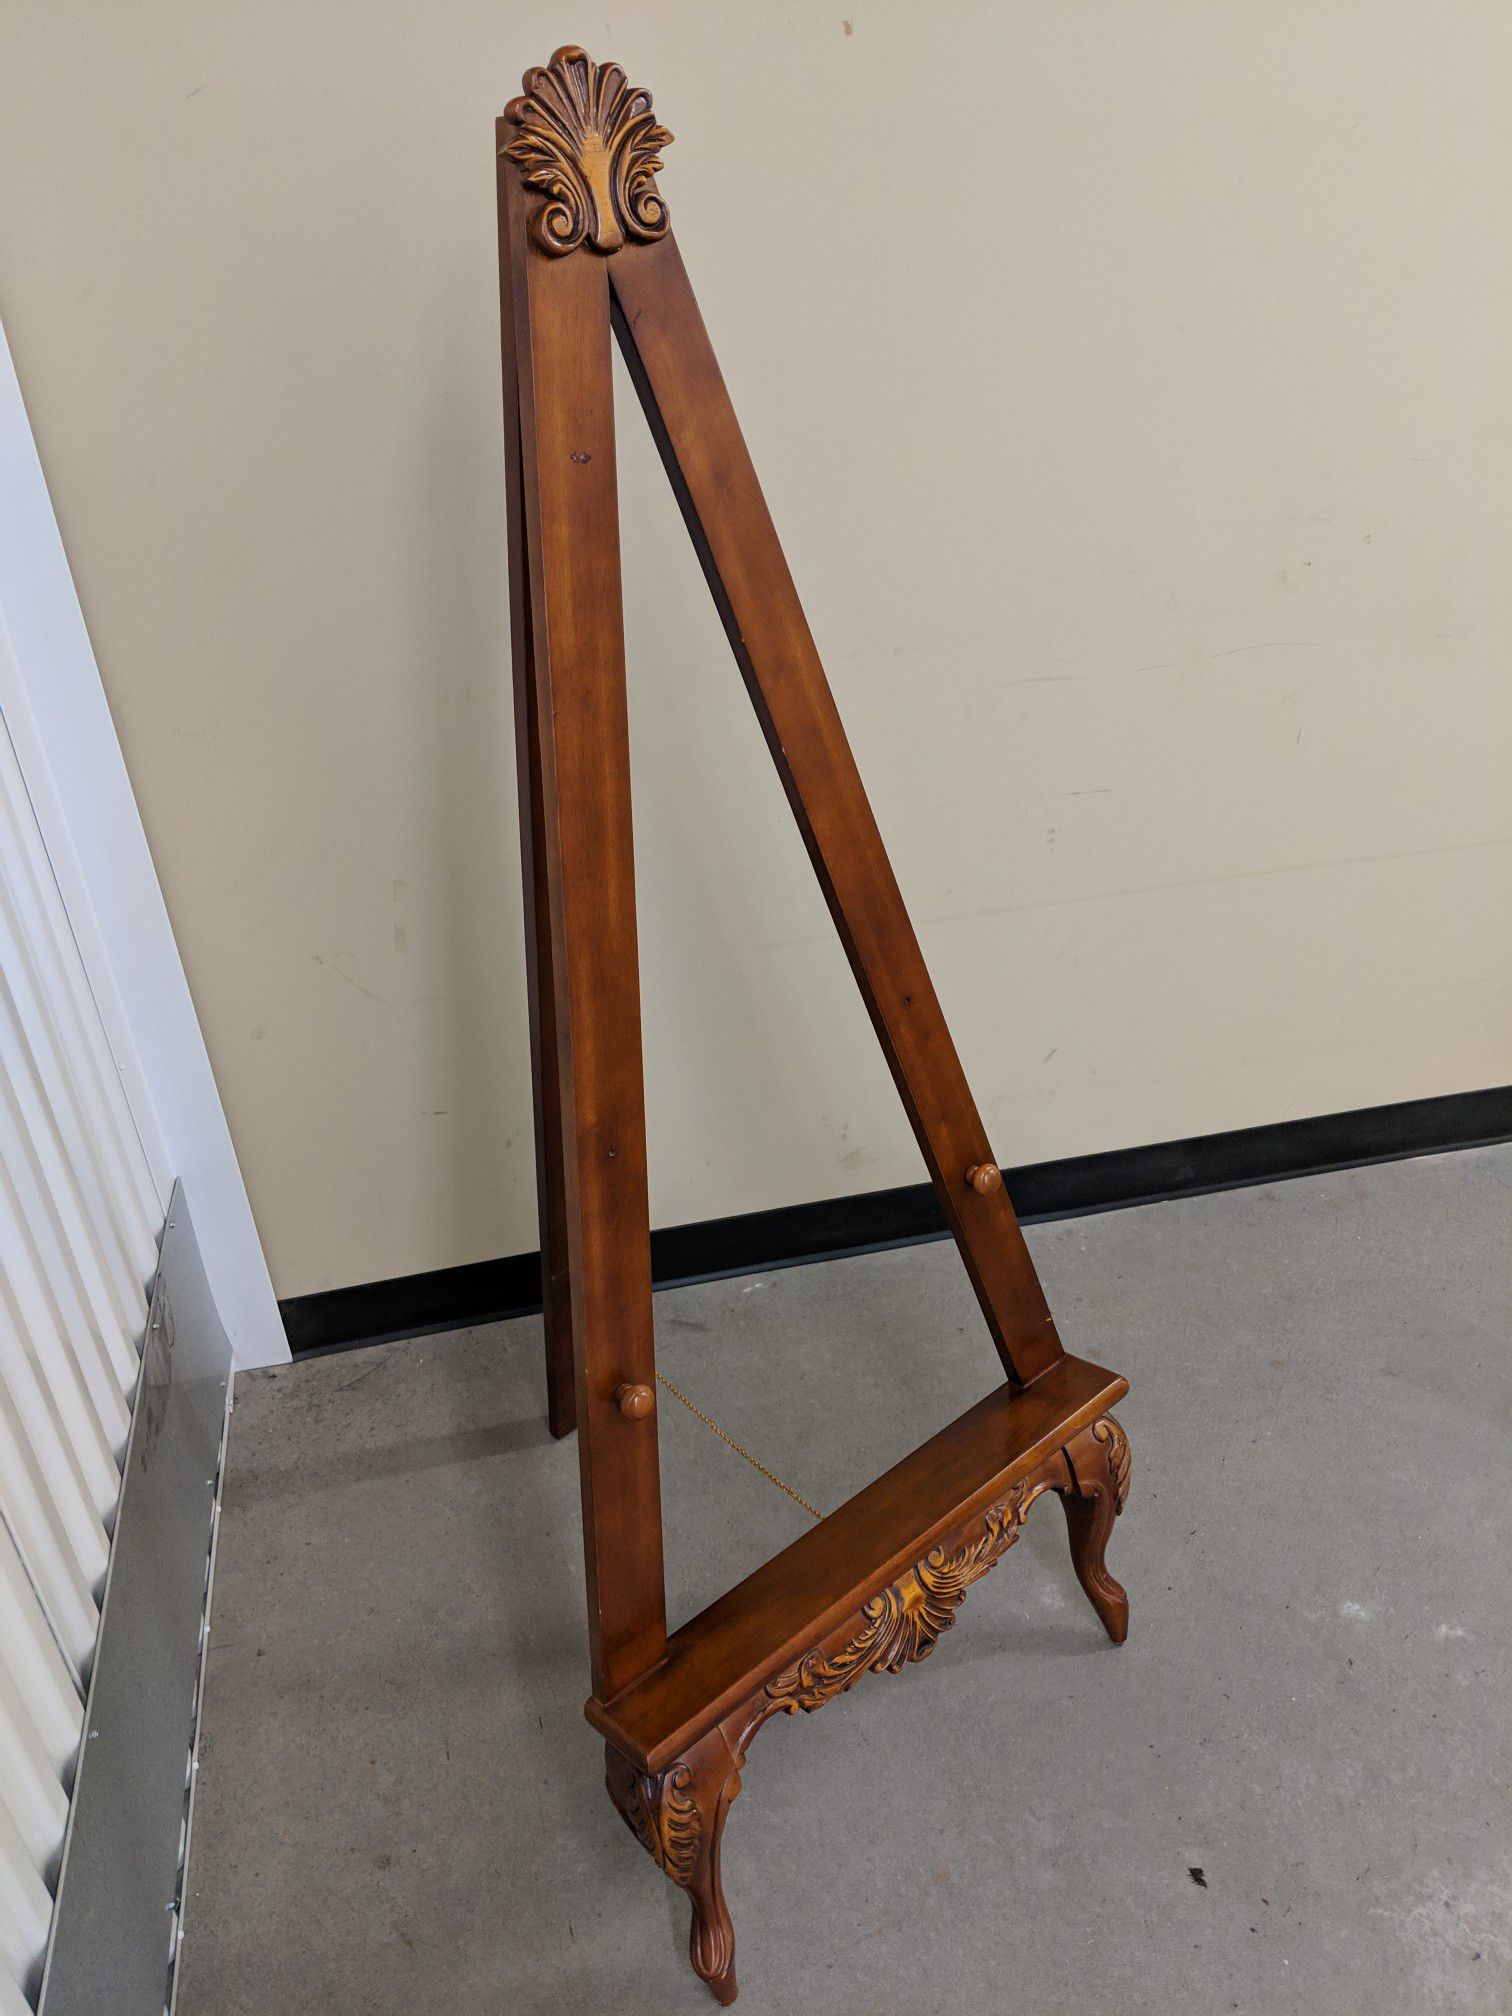 Table Easel For Painting and Displaying Artwork for Sale in Blackstone, MA  - OfferUp